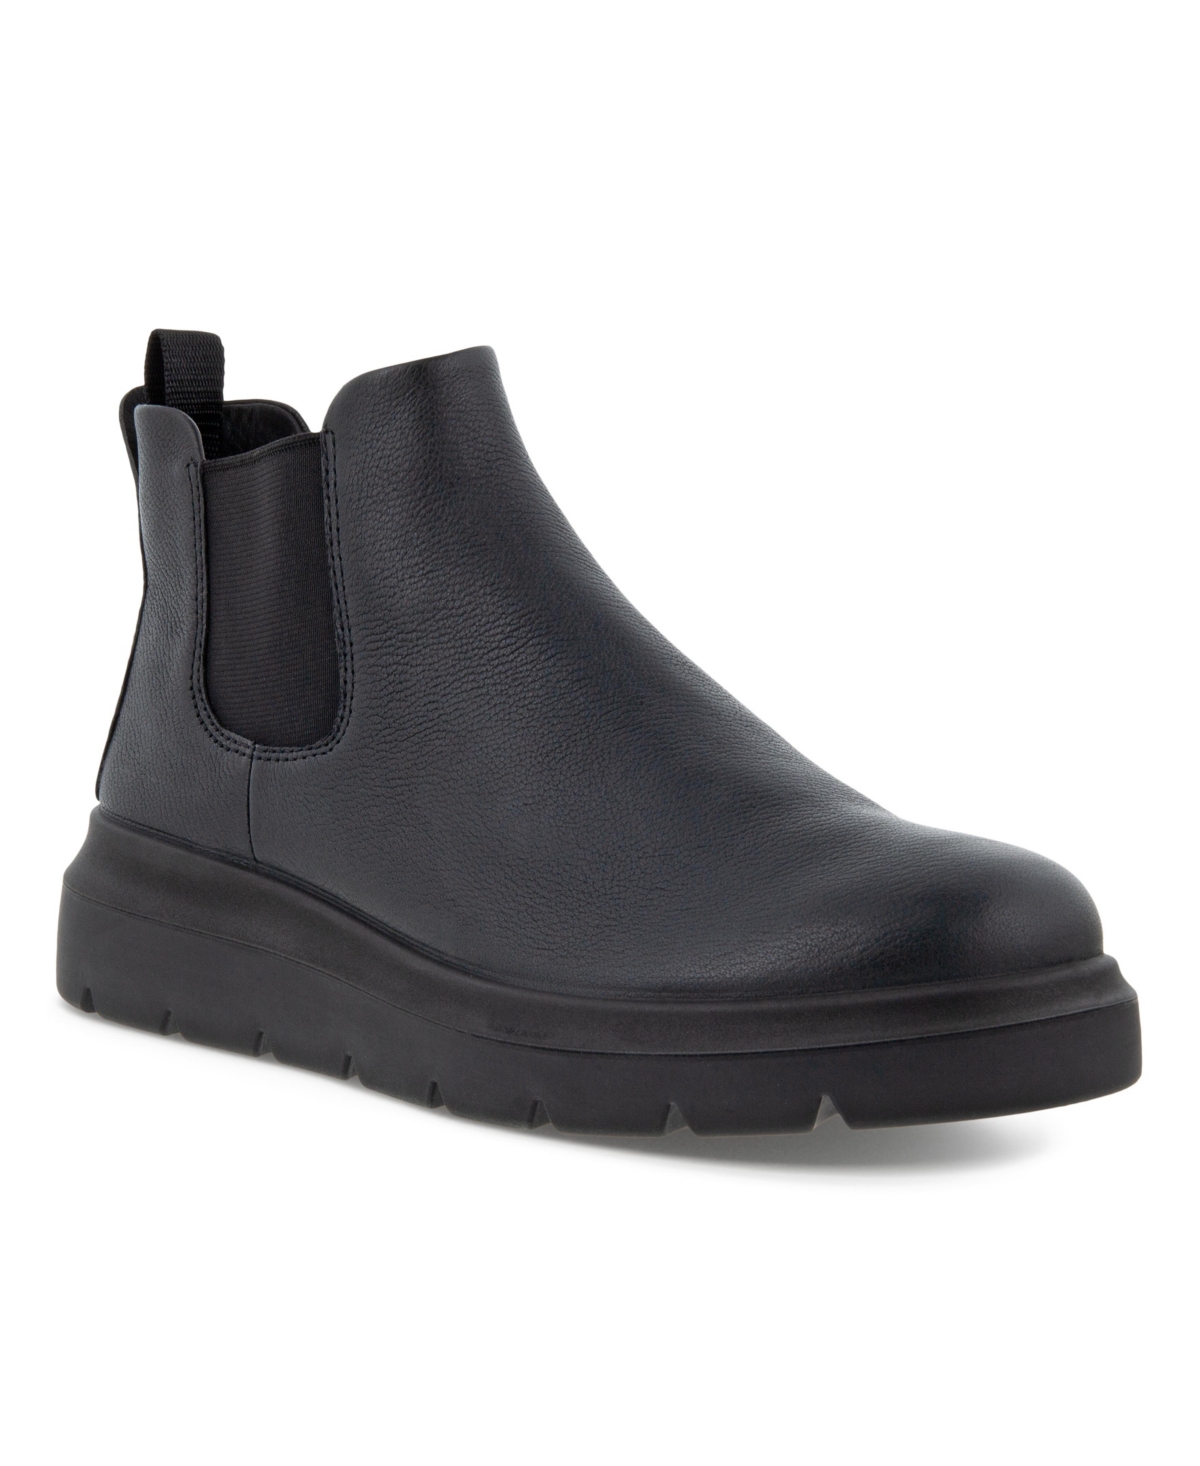 UPC 194890905054 product image for Ecco Women's Nouvelle Chelsea Nubuck Leather Boot Women's Shoes | upcitemdb.com